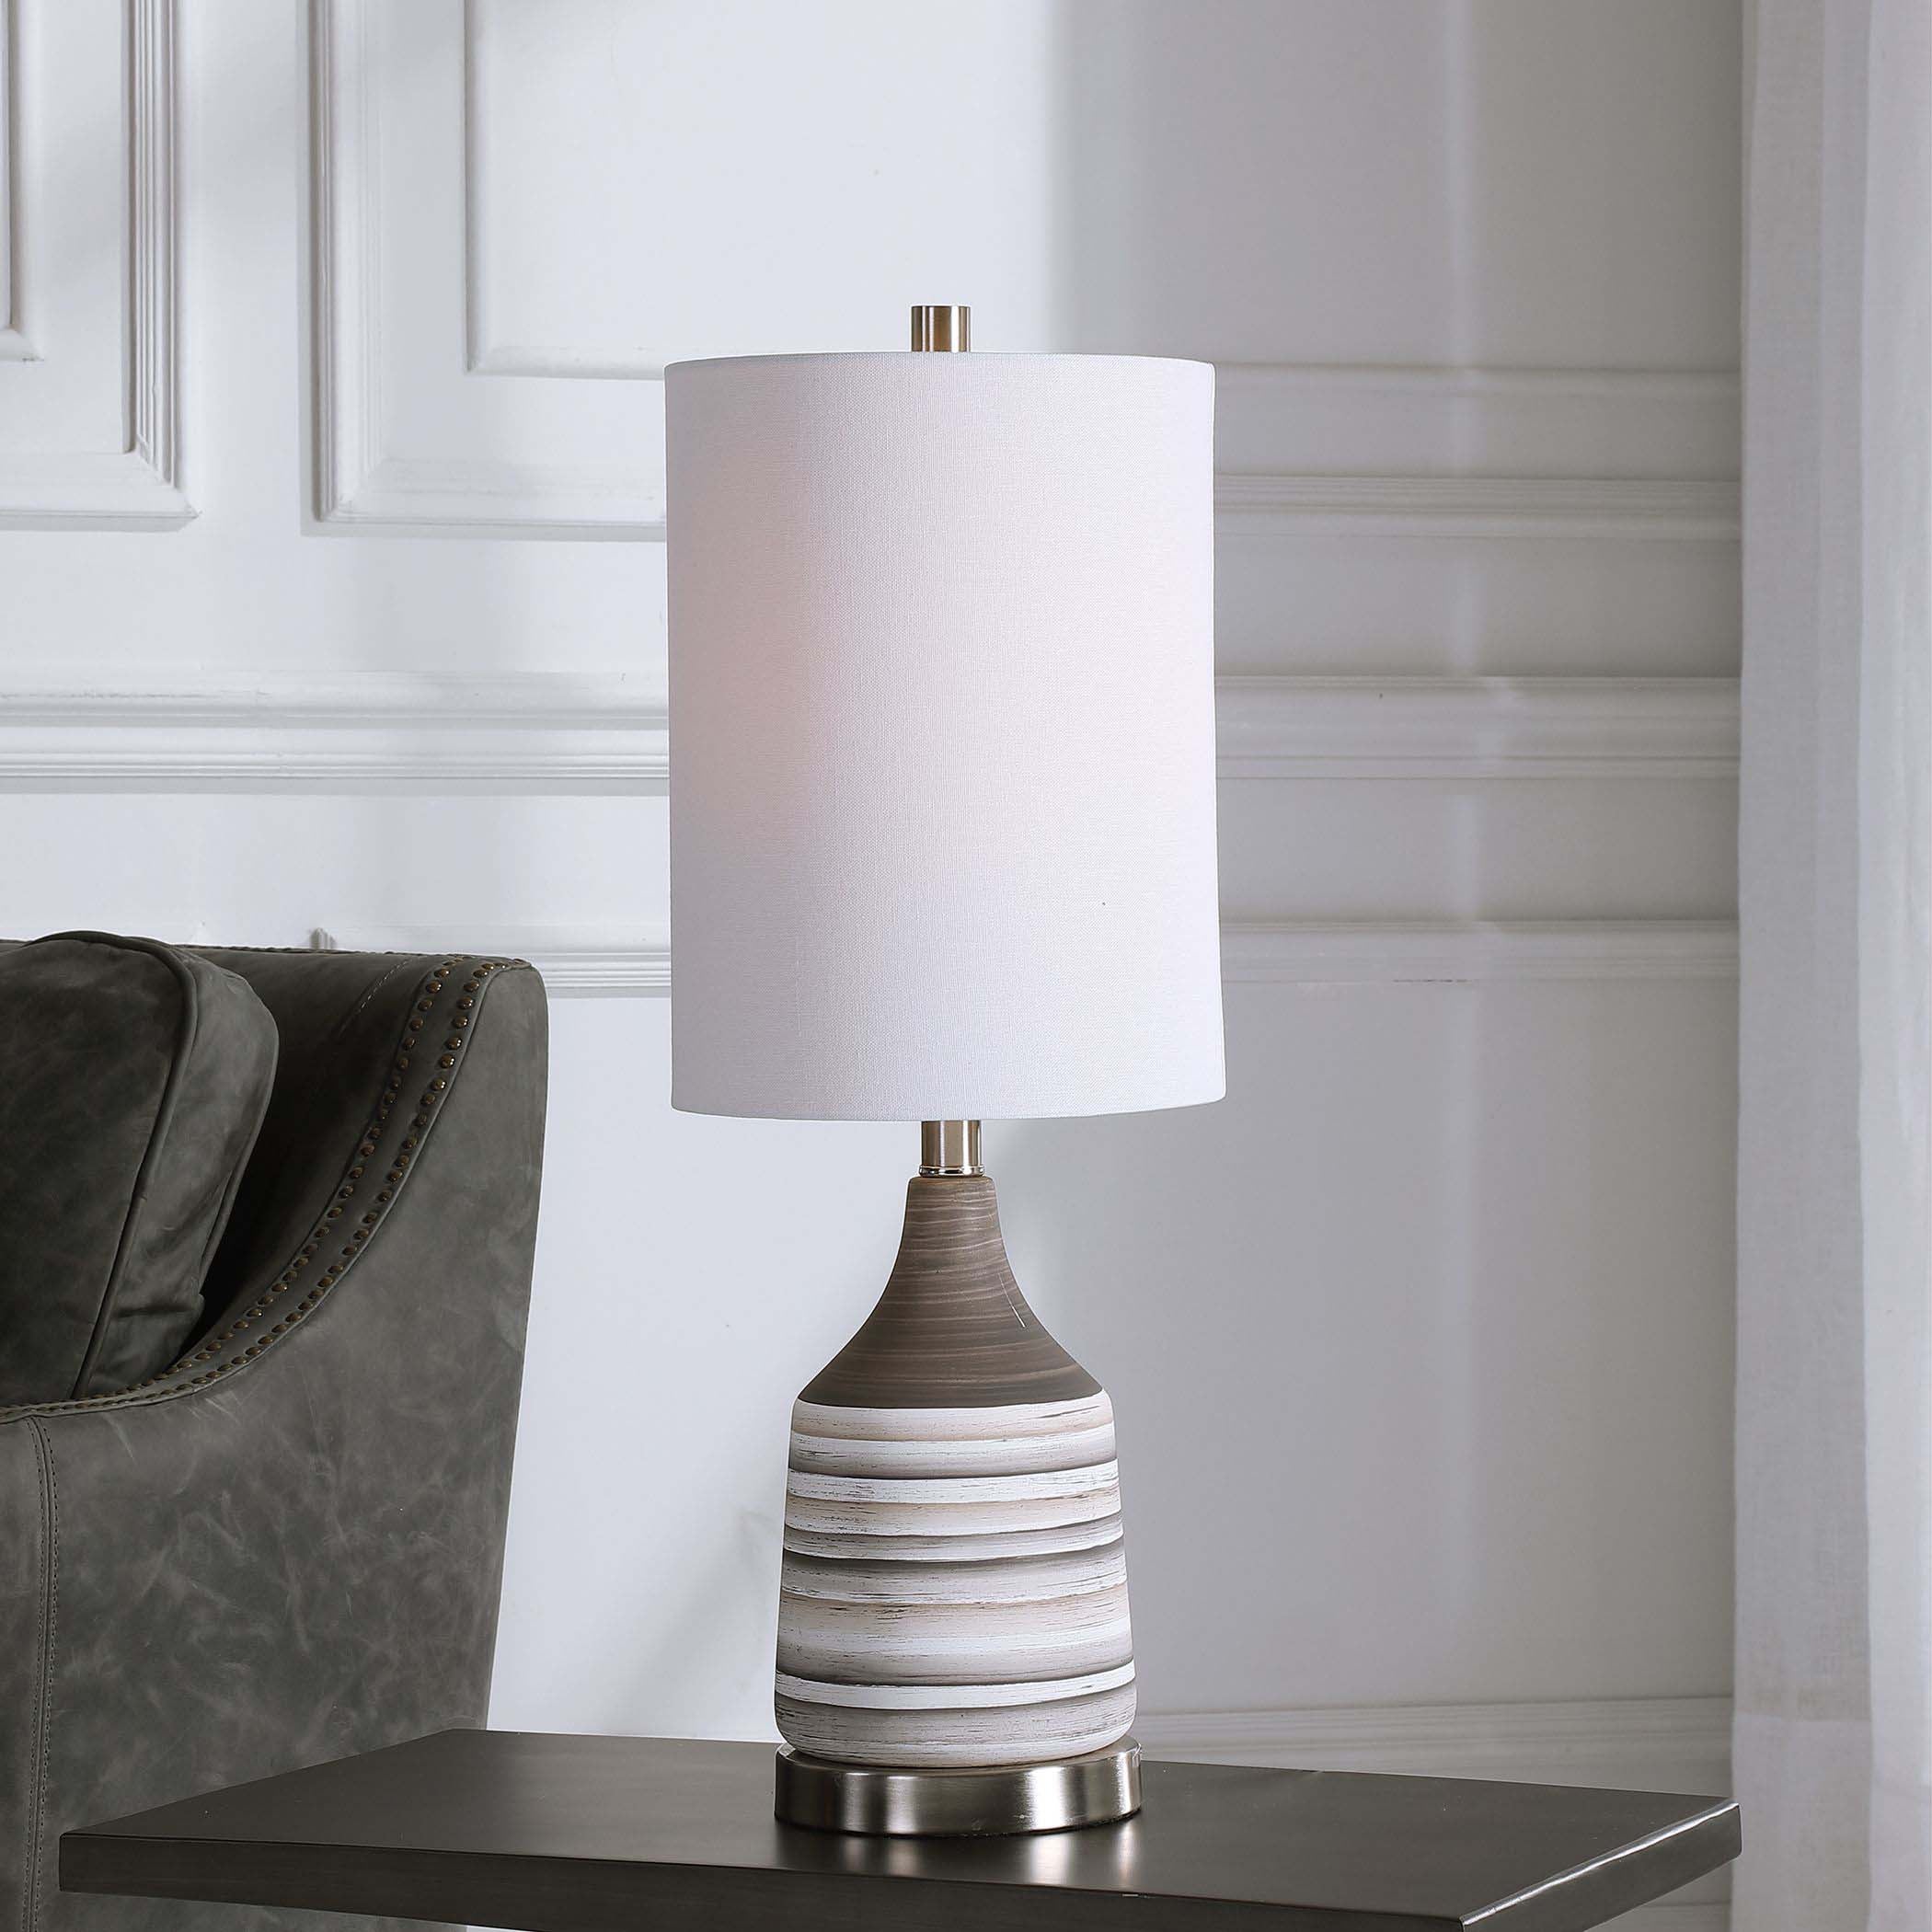 Decor Market Table Lamp With Matte Finish On The Ceramic Base And A Mixture Of Charcoal